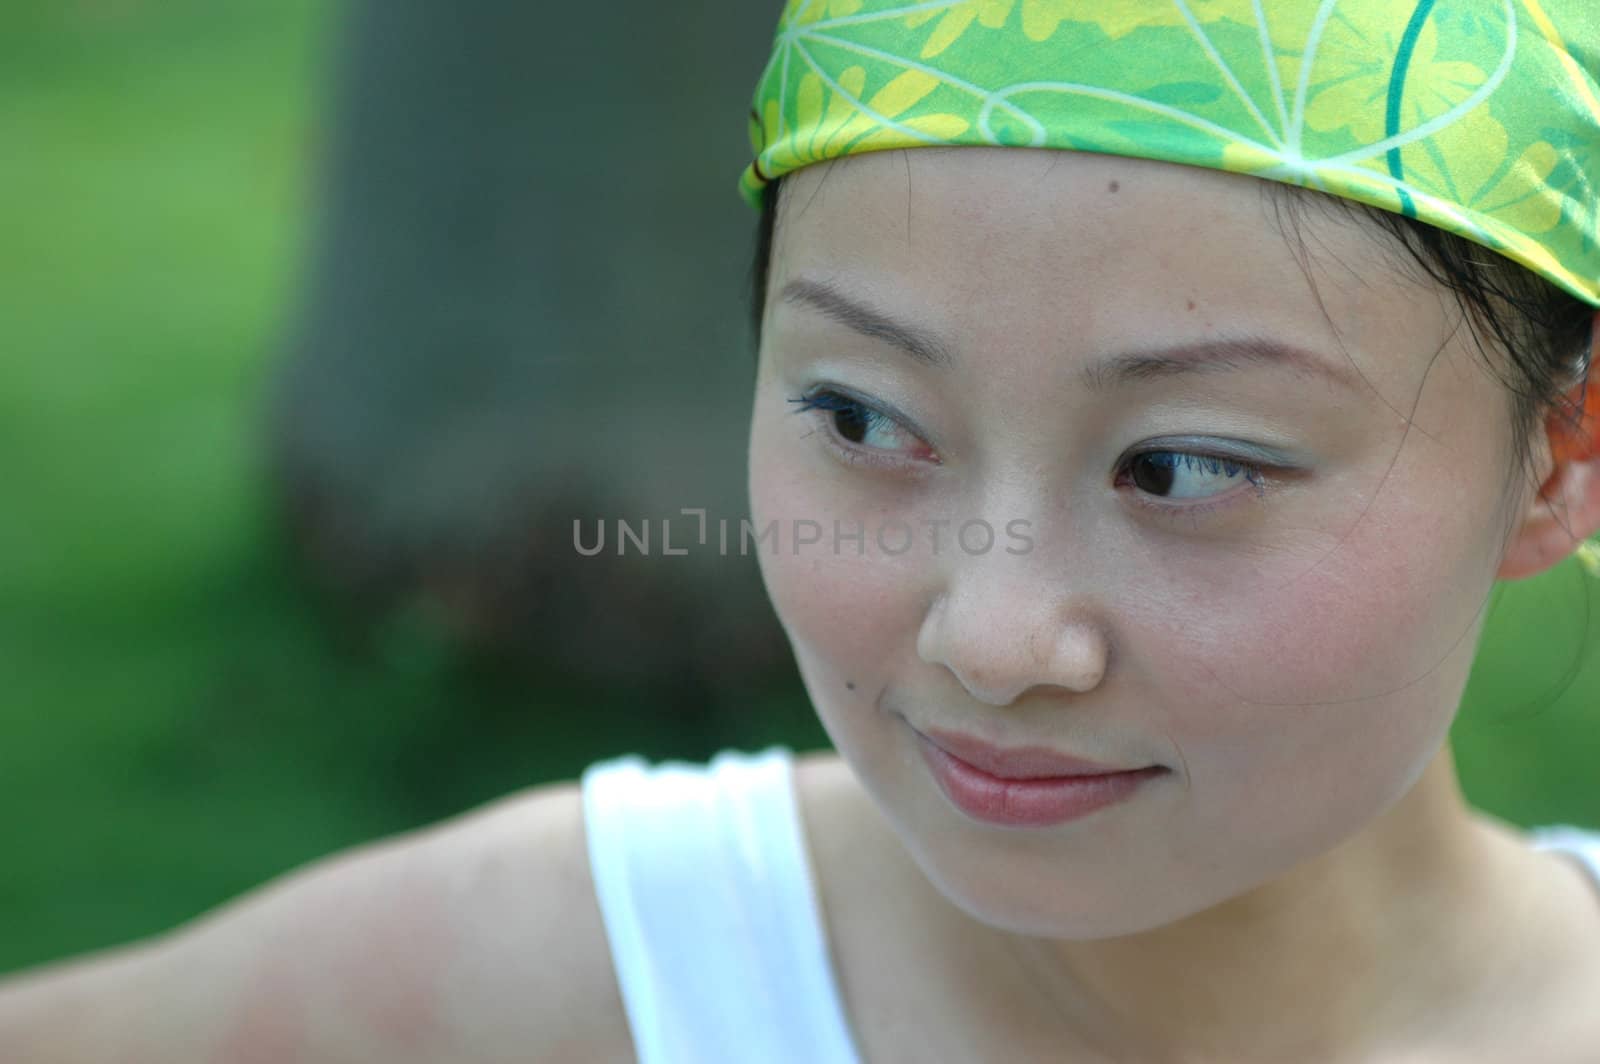 Chinese girl with scarf on head by bartekchiny